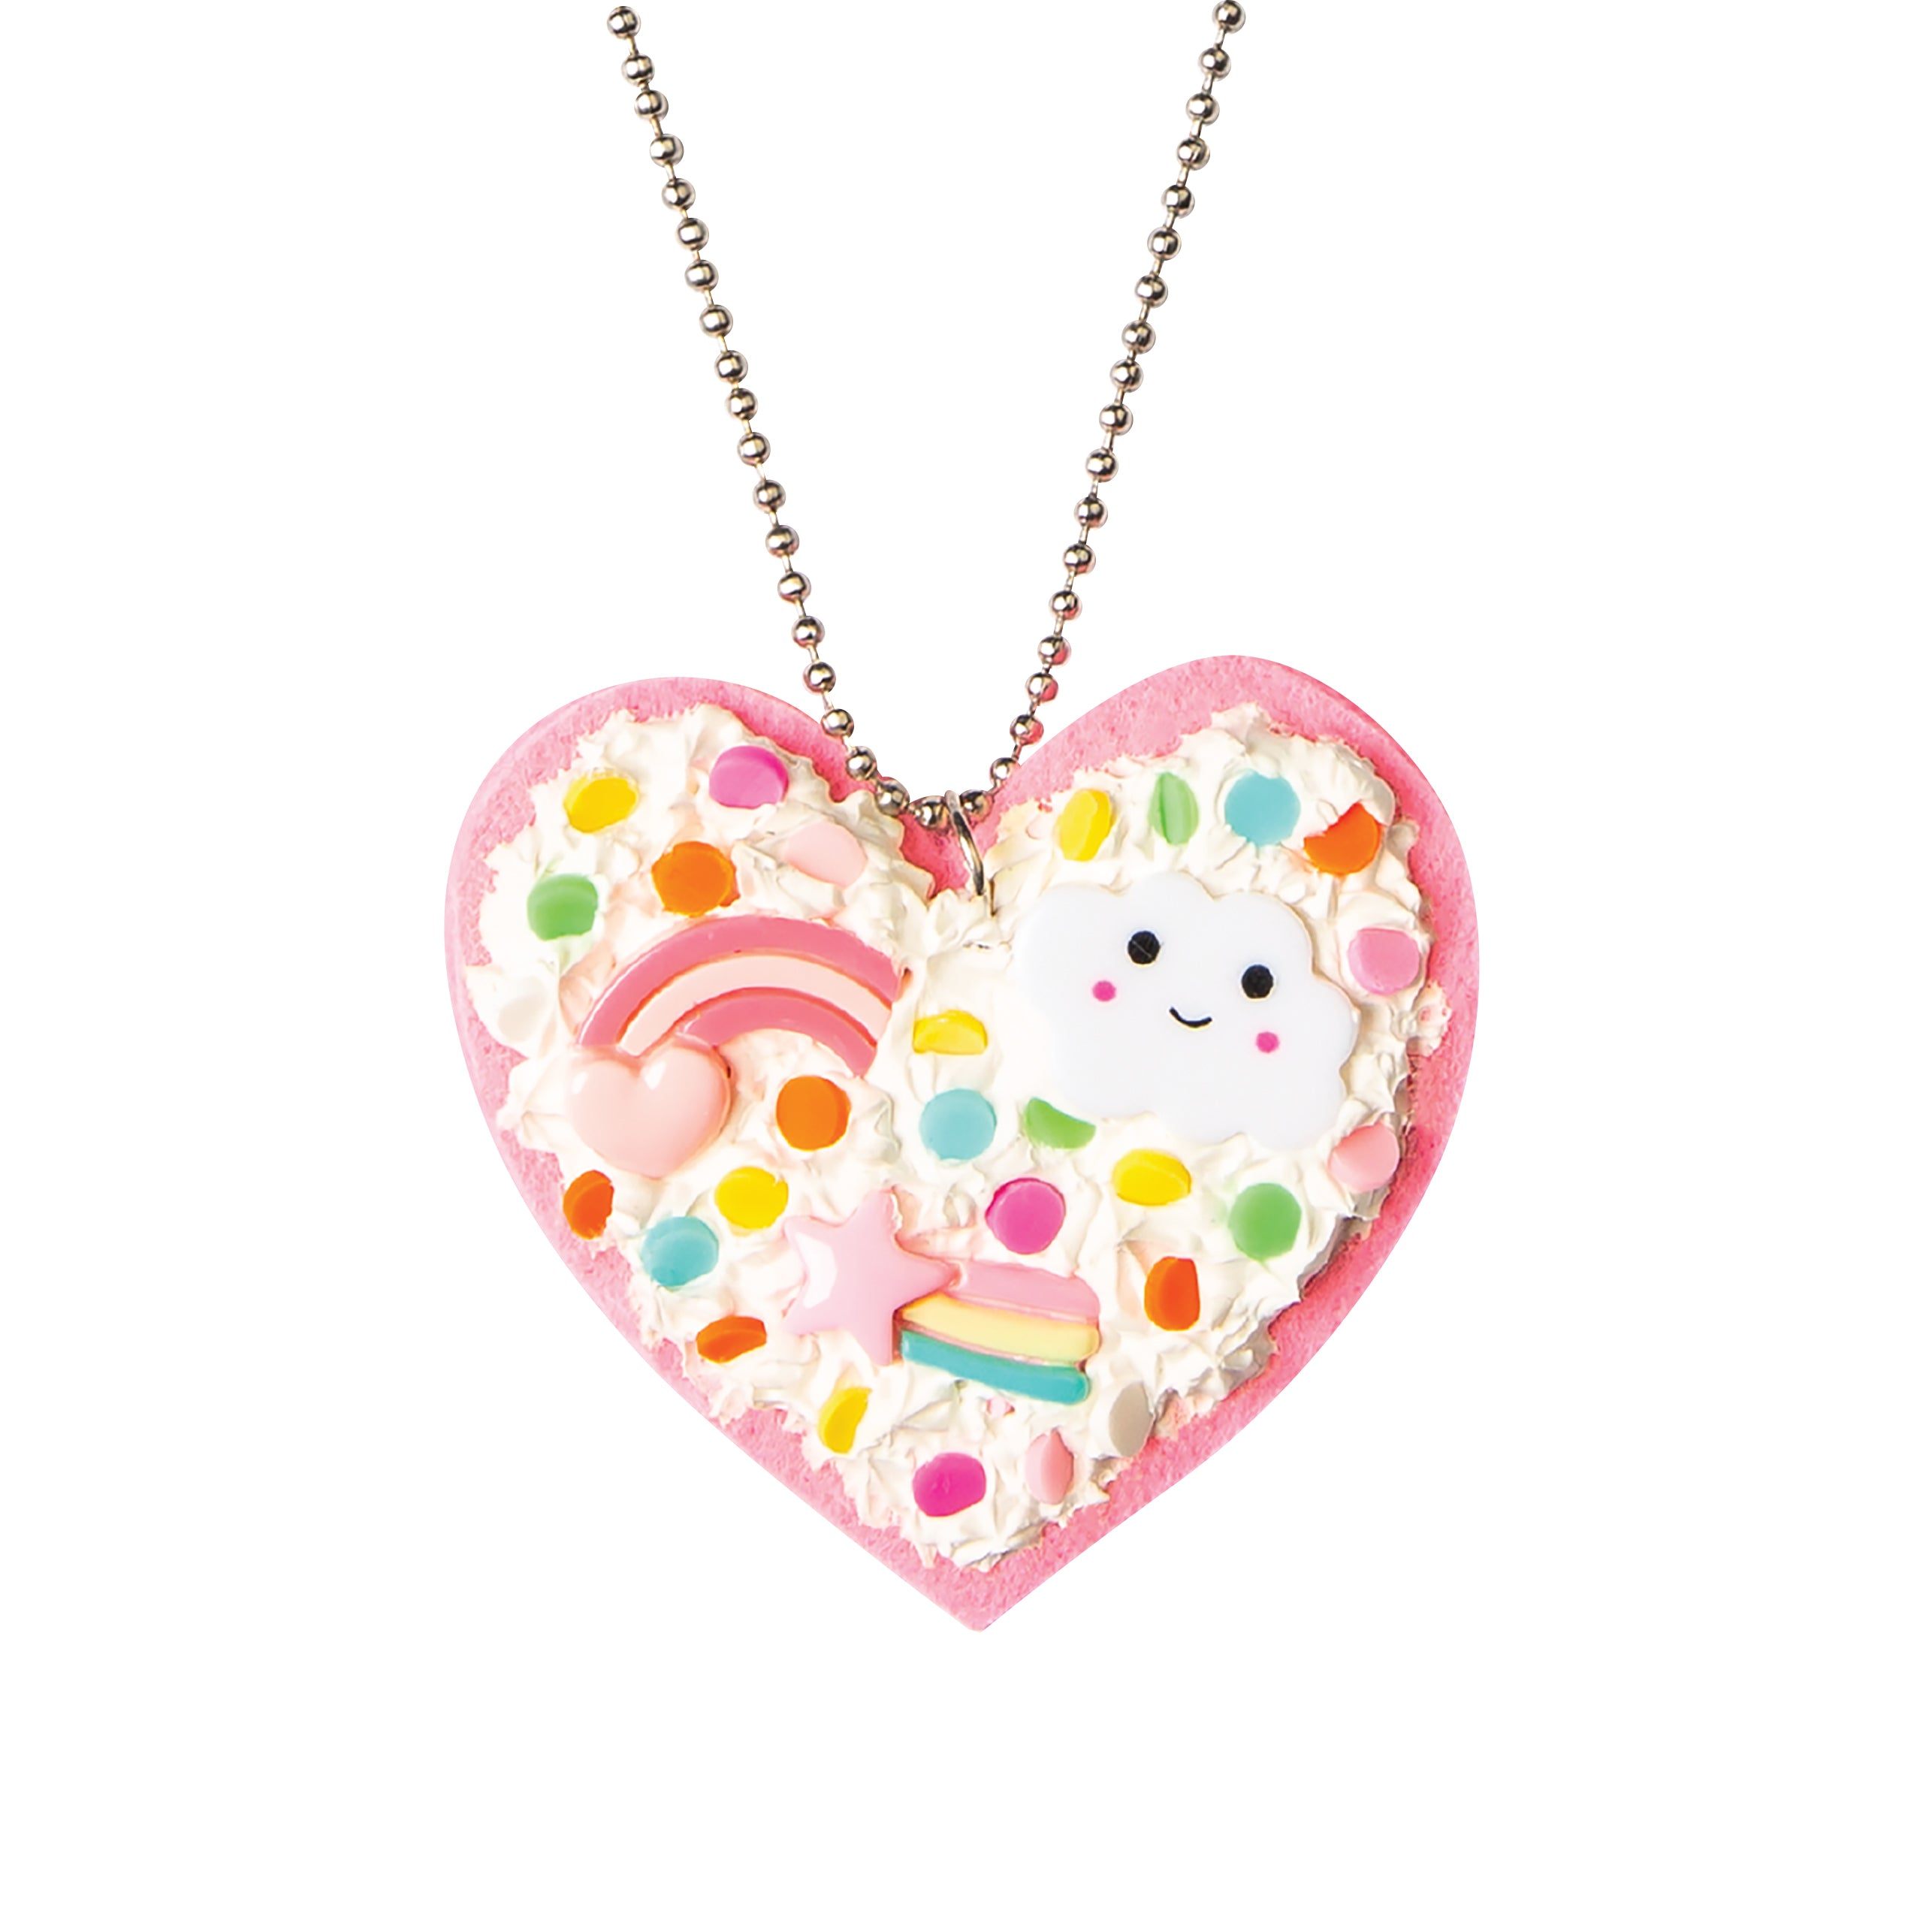 Tiger Tribe | Decorama Heart Necklace